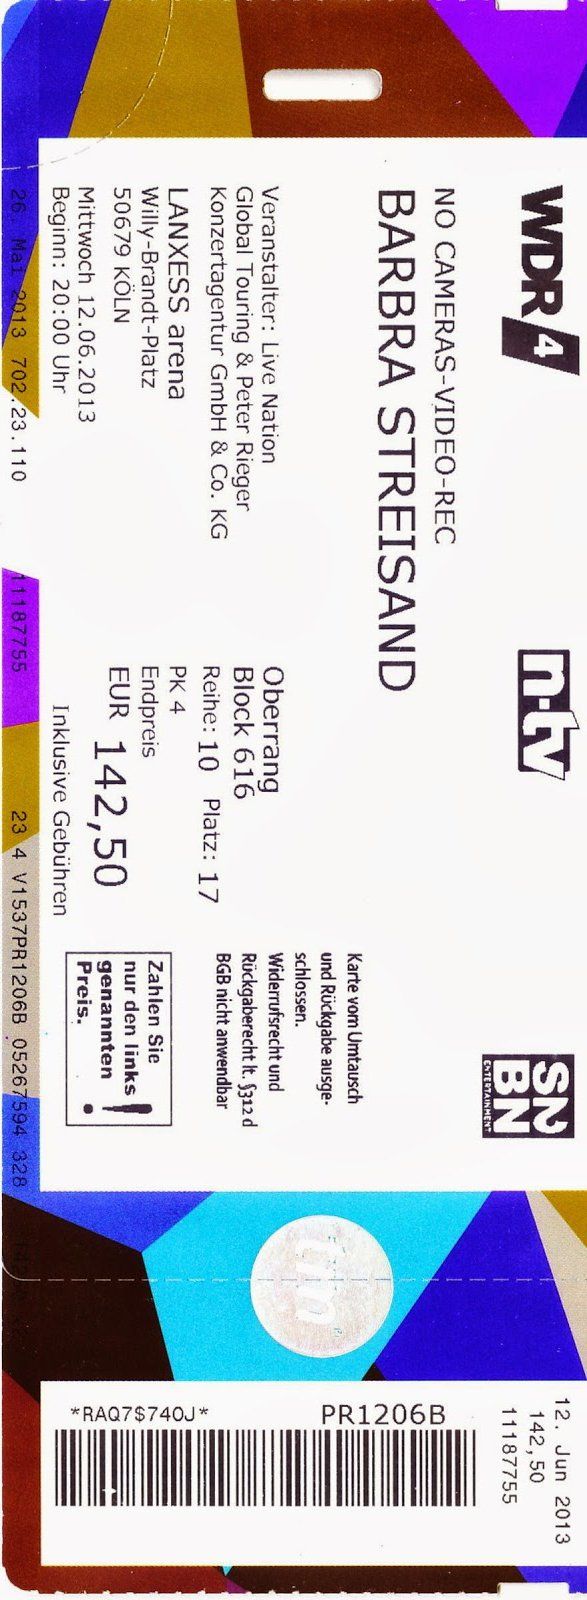 Concert ticket to Cologne 2013 Streisand show